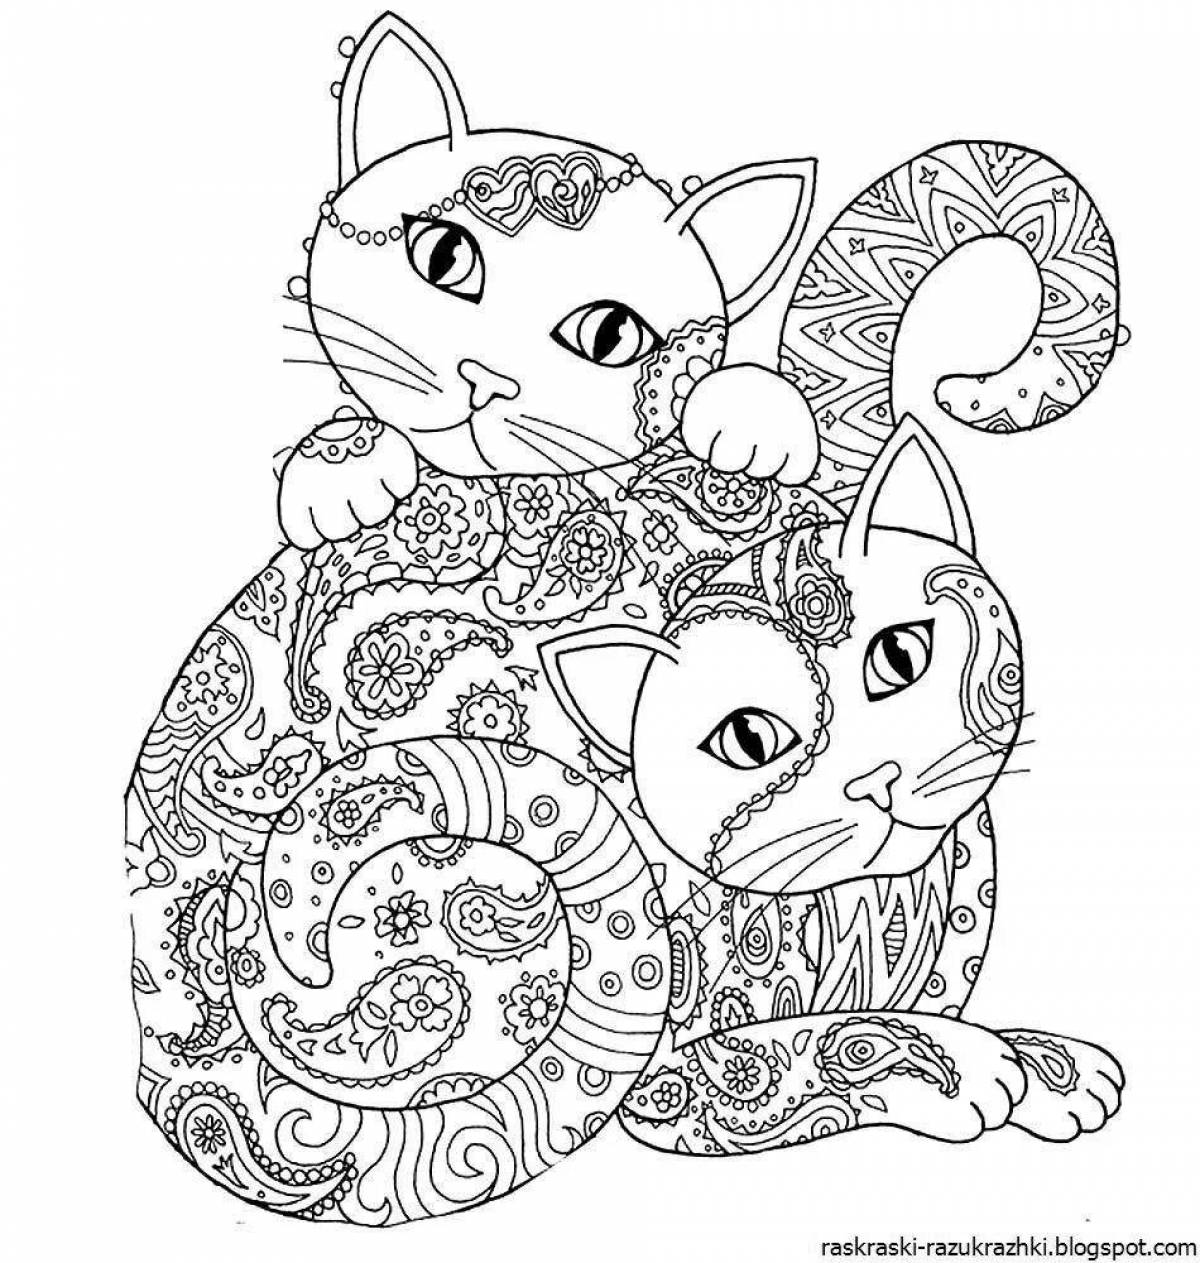 Fun coloring book 9 years for girls cats